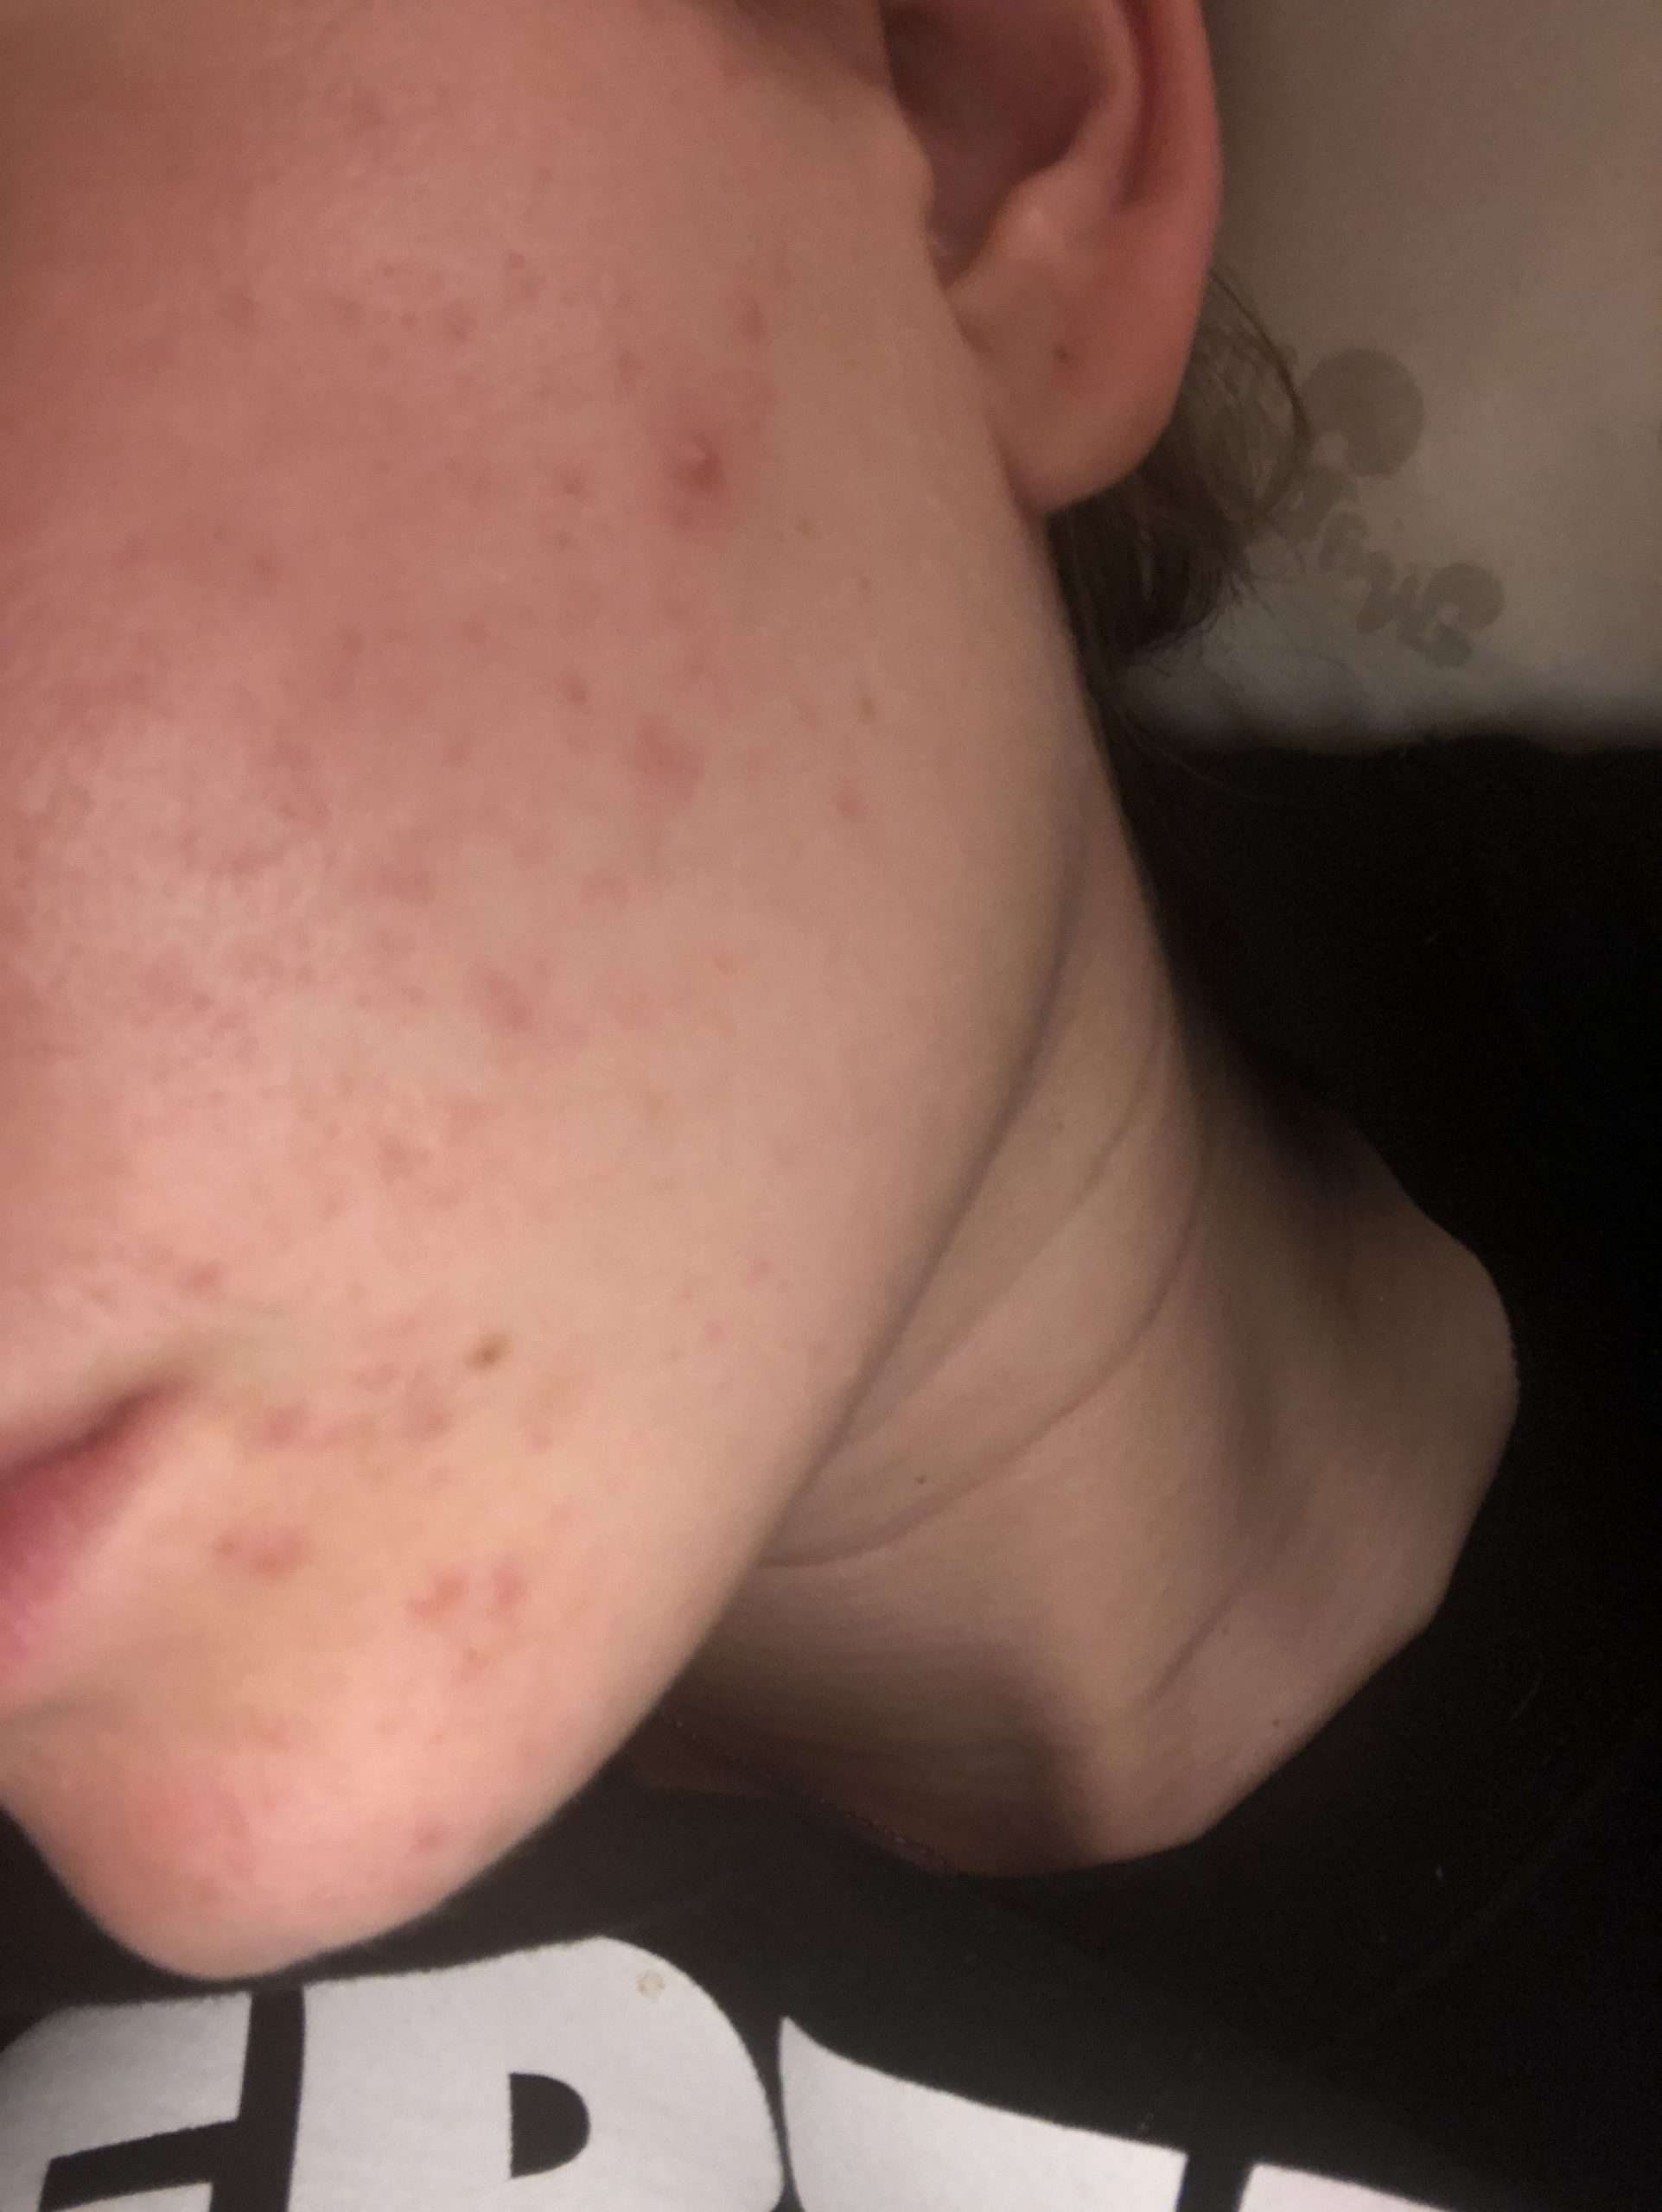 Can anyone tell me what kind of acne I have? Photo included